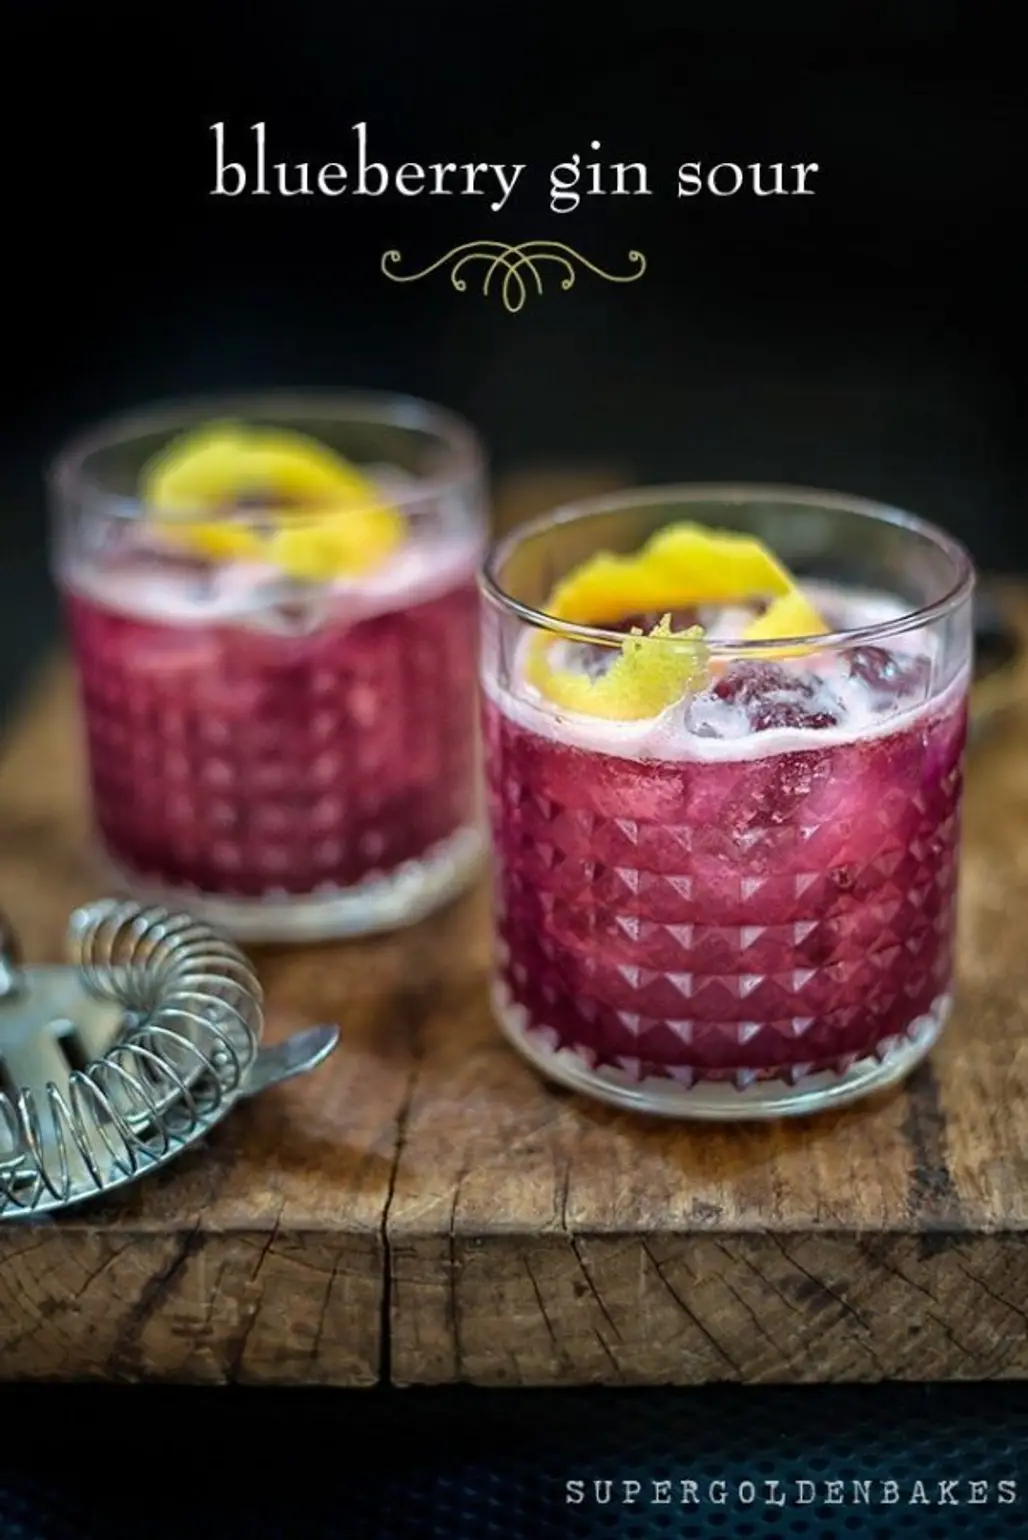 This Blueberry Gin Sour Cocktail